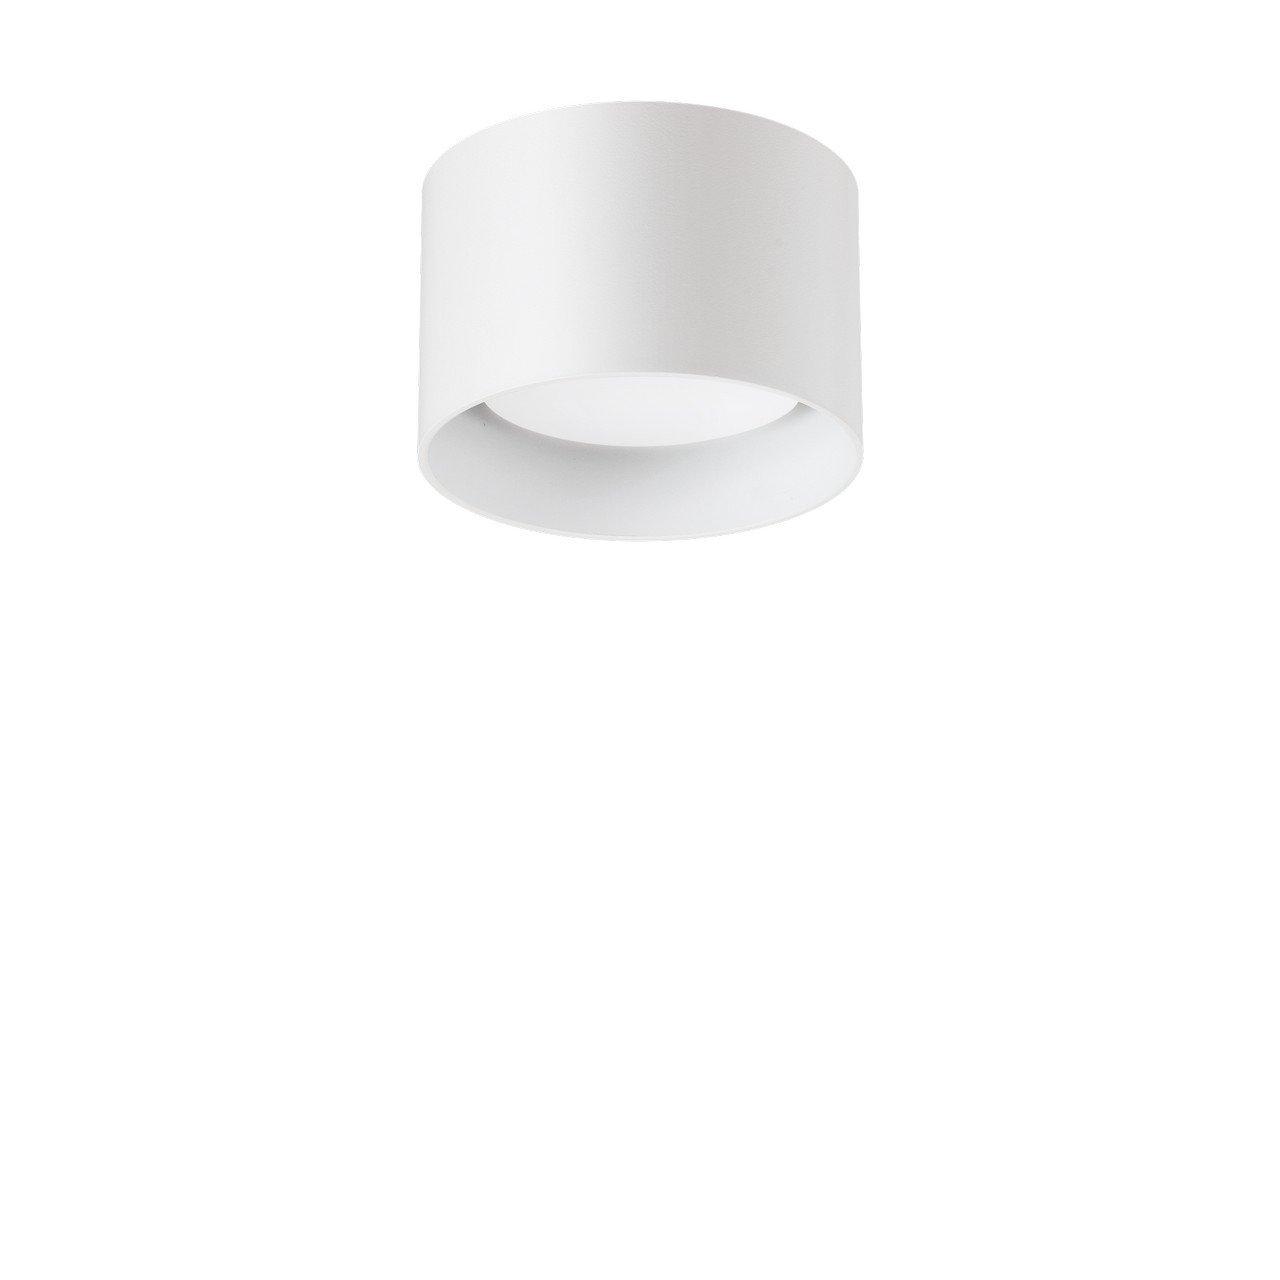 Spike Round Surface Mounted Downlight White